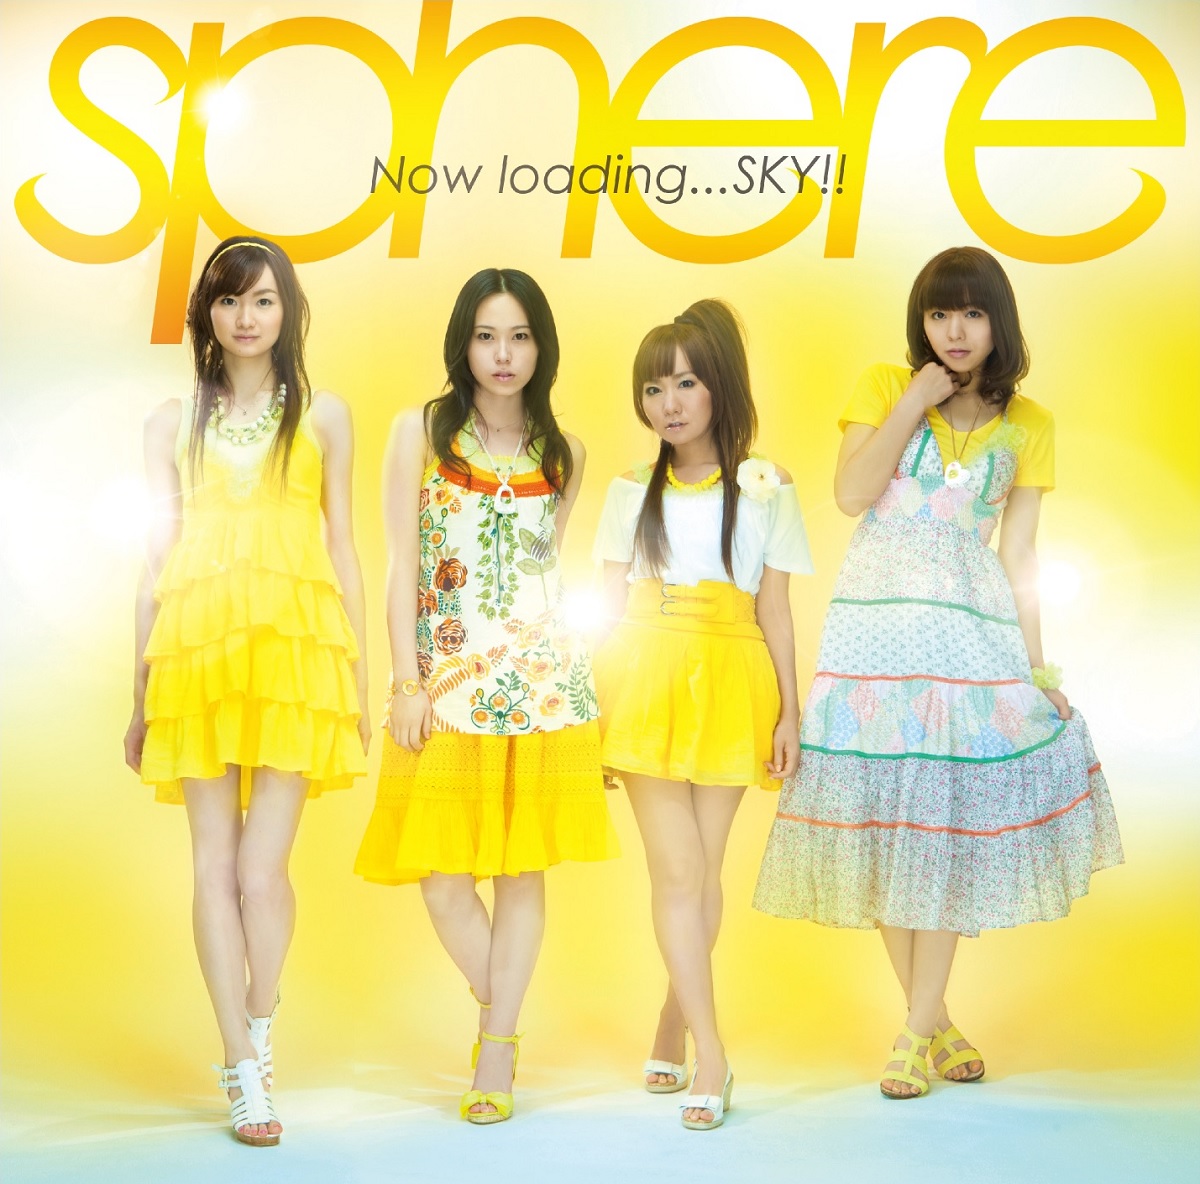 Cover art for『Sphere - Now loading...SKY!!』from the release『Now loading...SKY!!』